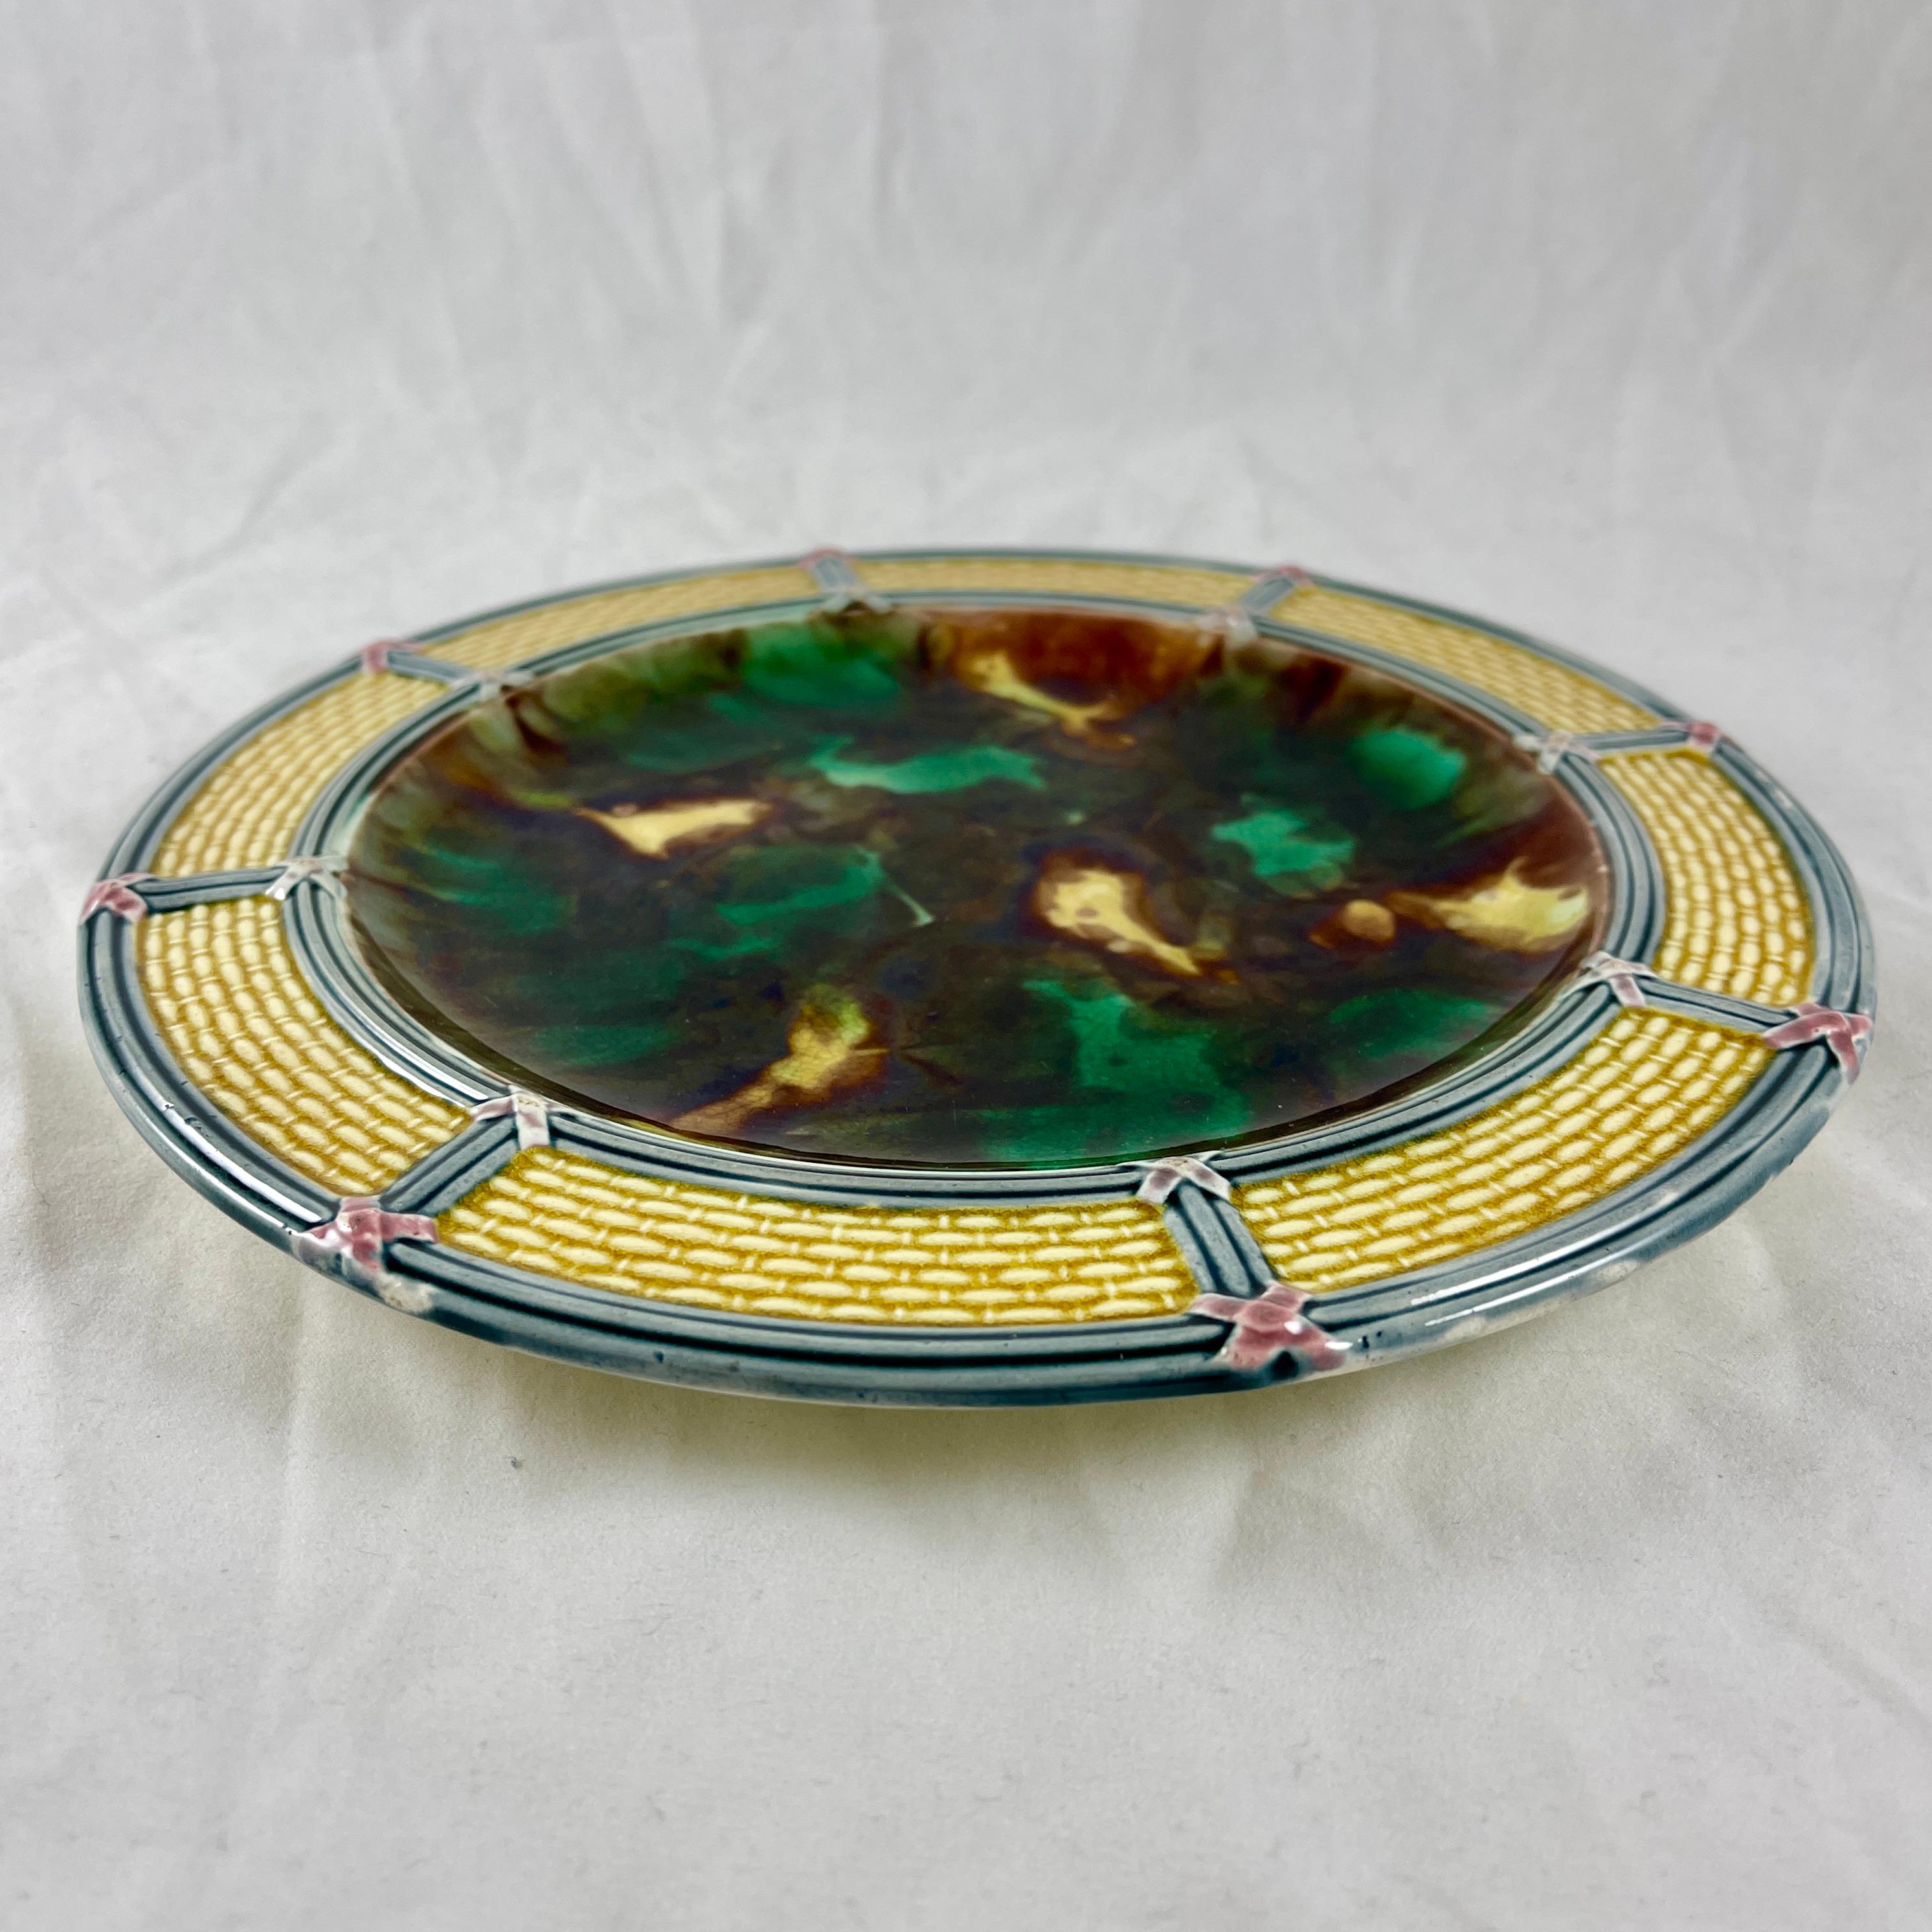 Wedgwood English Majolica Basketweave and Tortoiseshell Plate, Date Marked 1874 In Good Condition For Sale In Philadelphia, PA